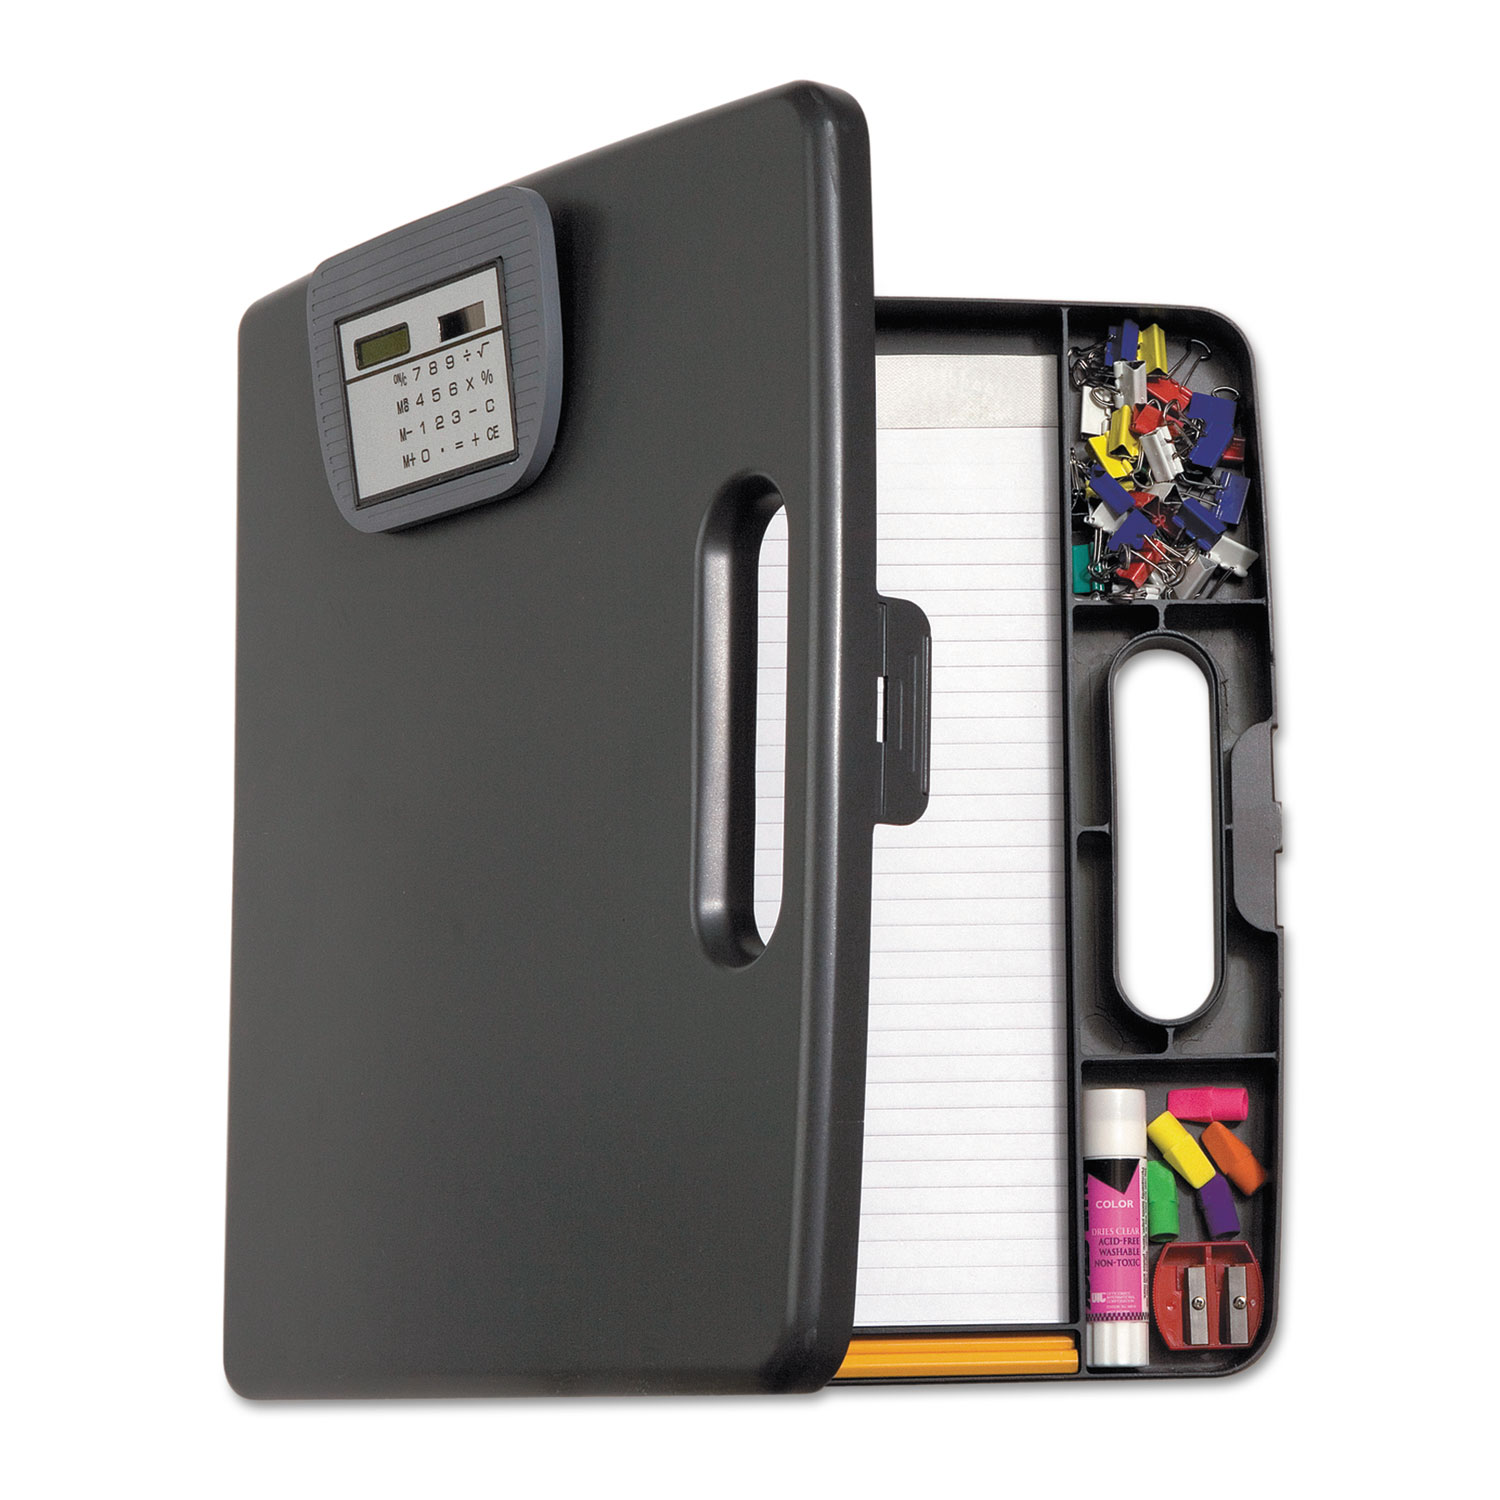  Officemate 83372 Portable Storage Clipboard Case w/Calculator, 12w x 13 1/10h, Charcoal (OIC83372) 